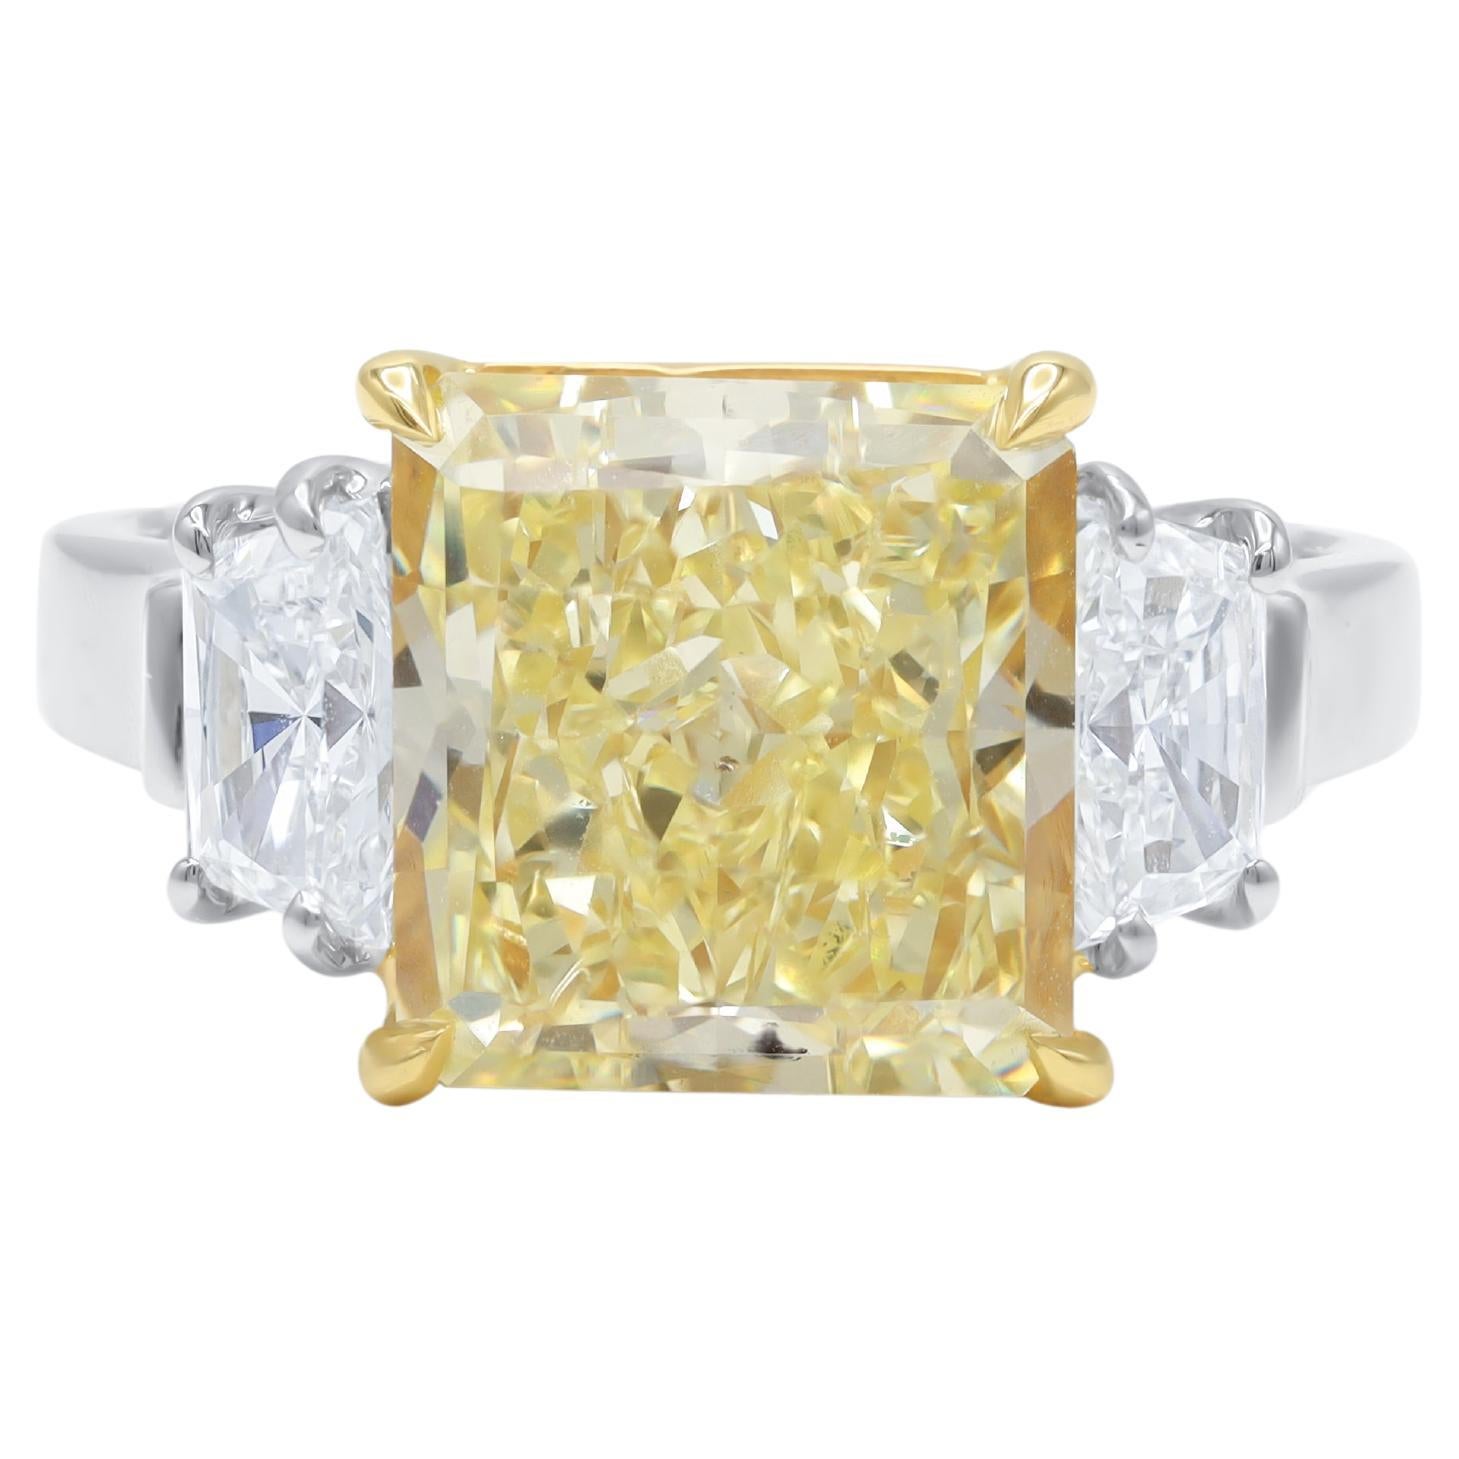 Diana M. Platinum Engagement 3 Stone Ring With 5.16 Fancy Yellow SI1 Radiant 